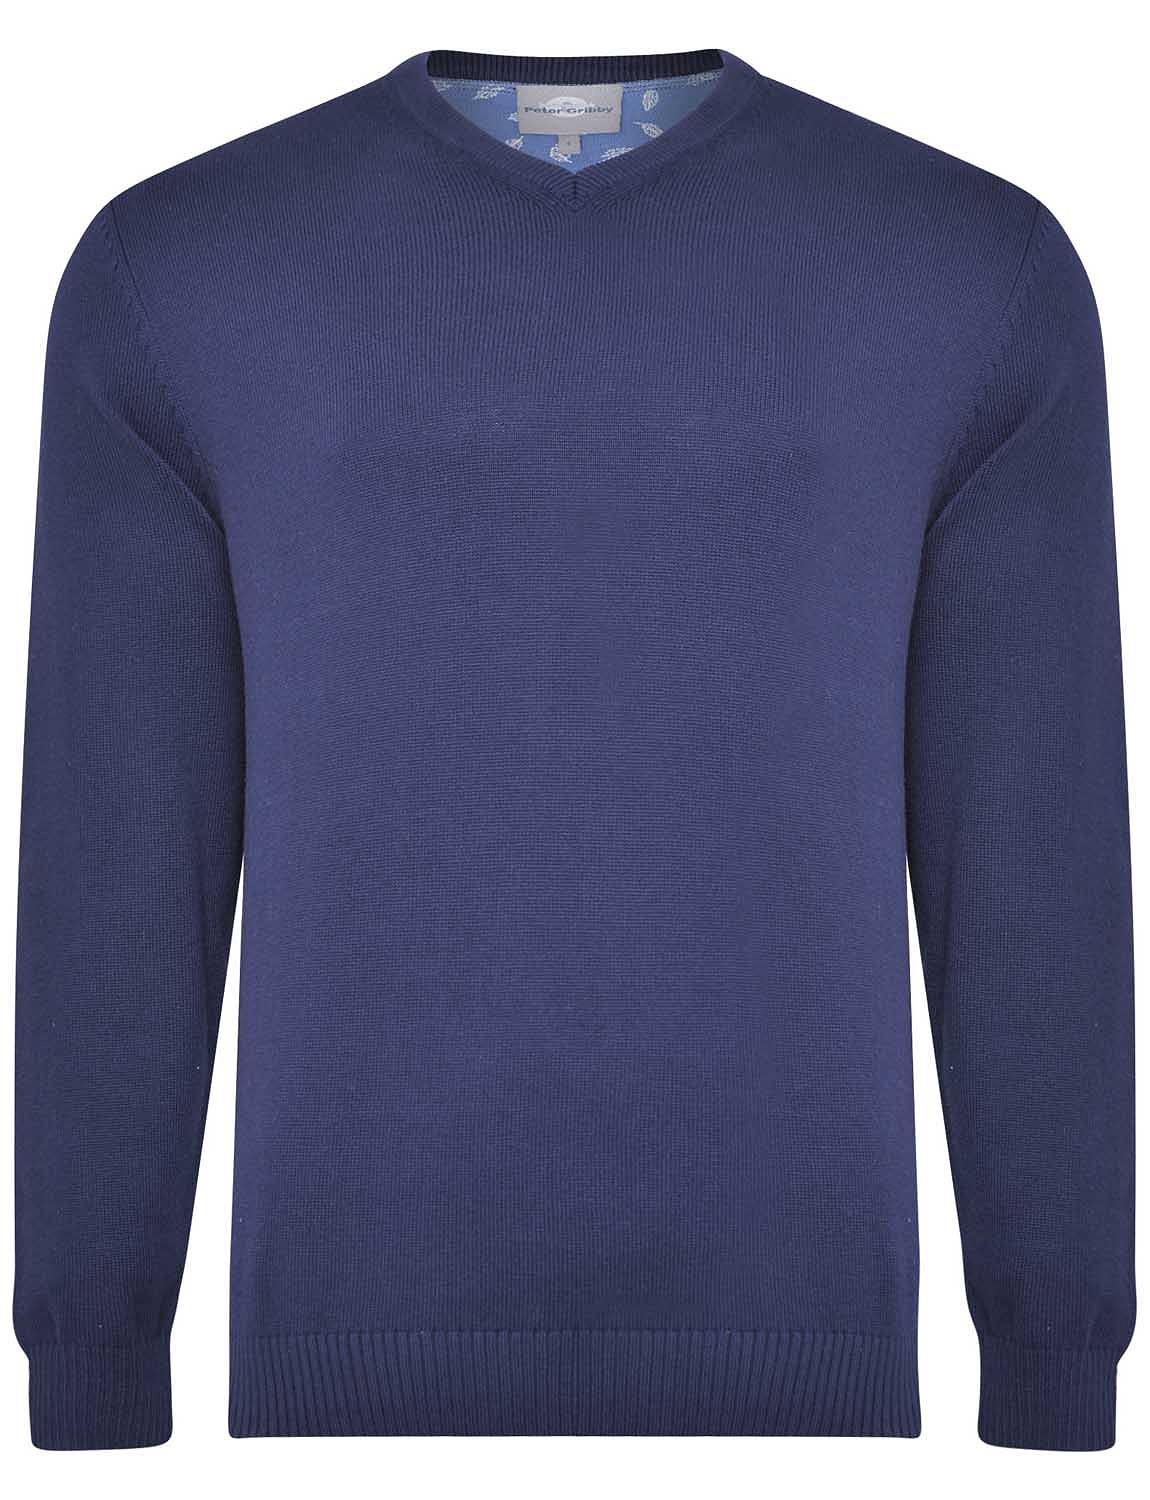 Peter Gribby Premium Combed Cotton V Neck Jumper | Chums